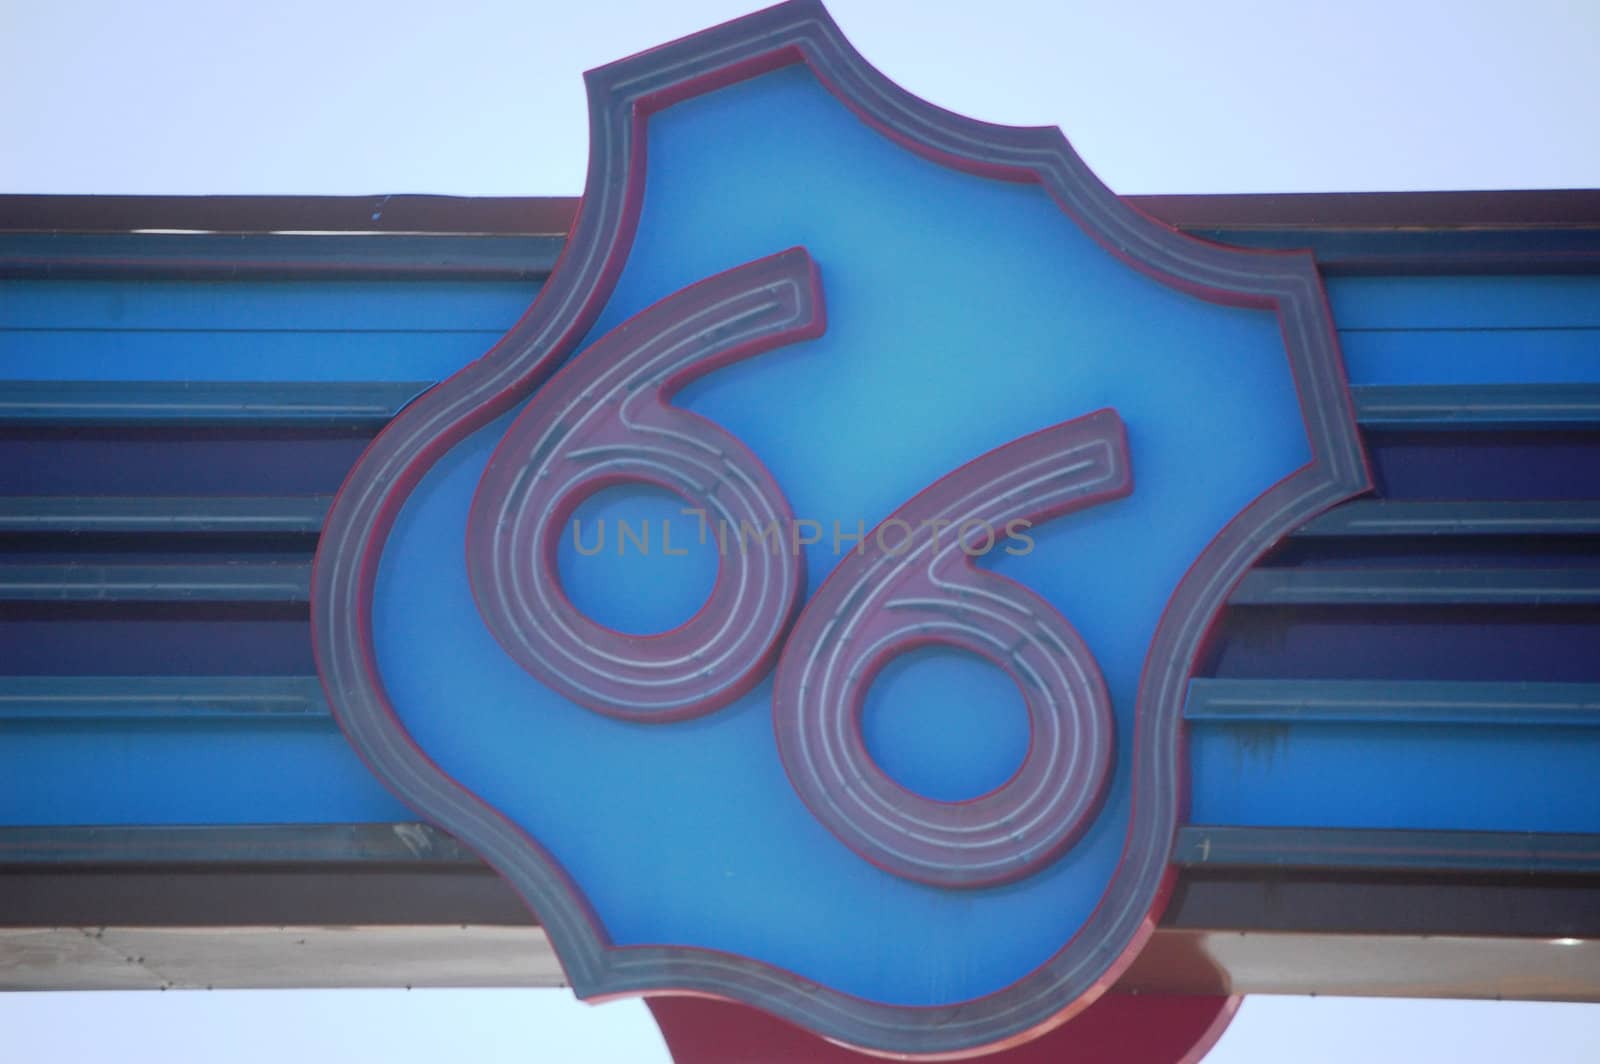 Route 66 Street Sign by RefocusPhoto